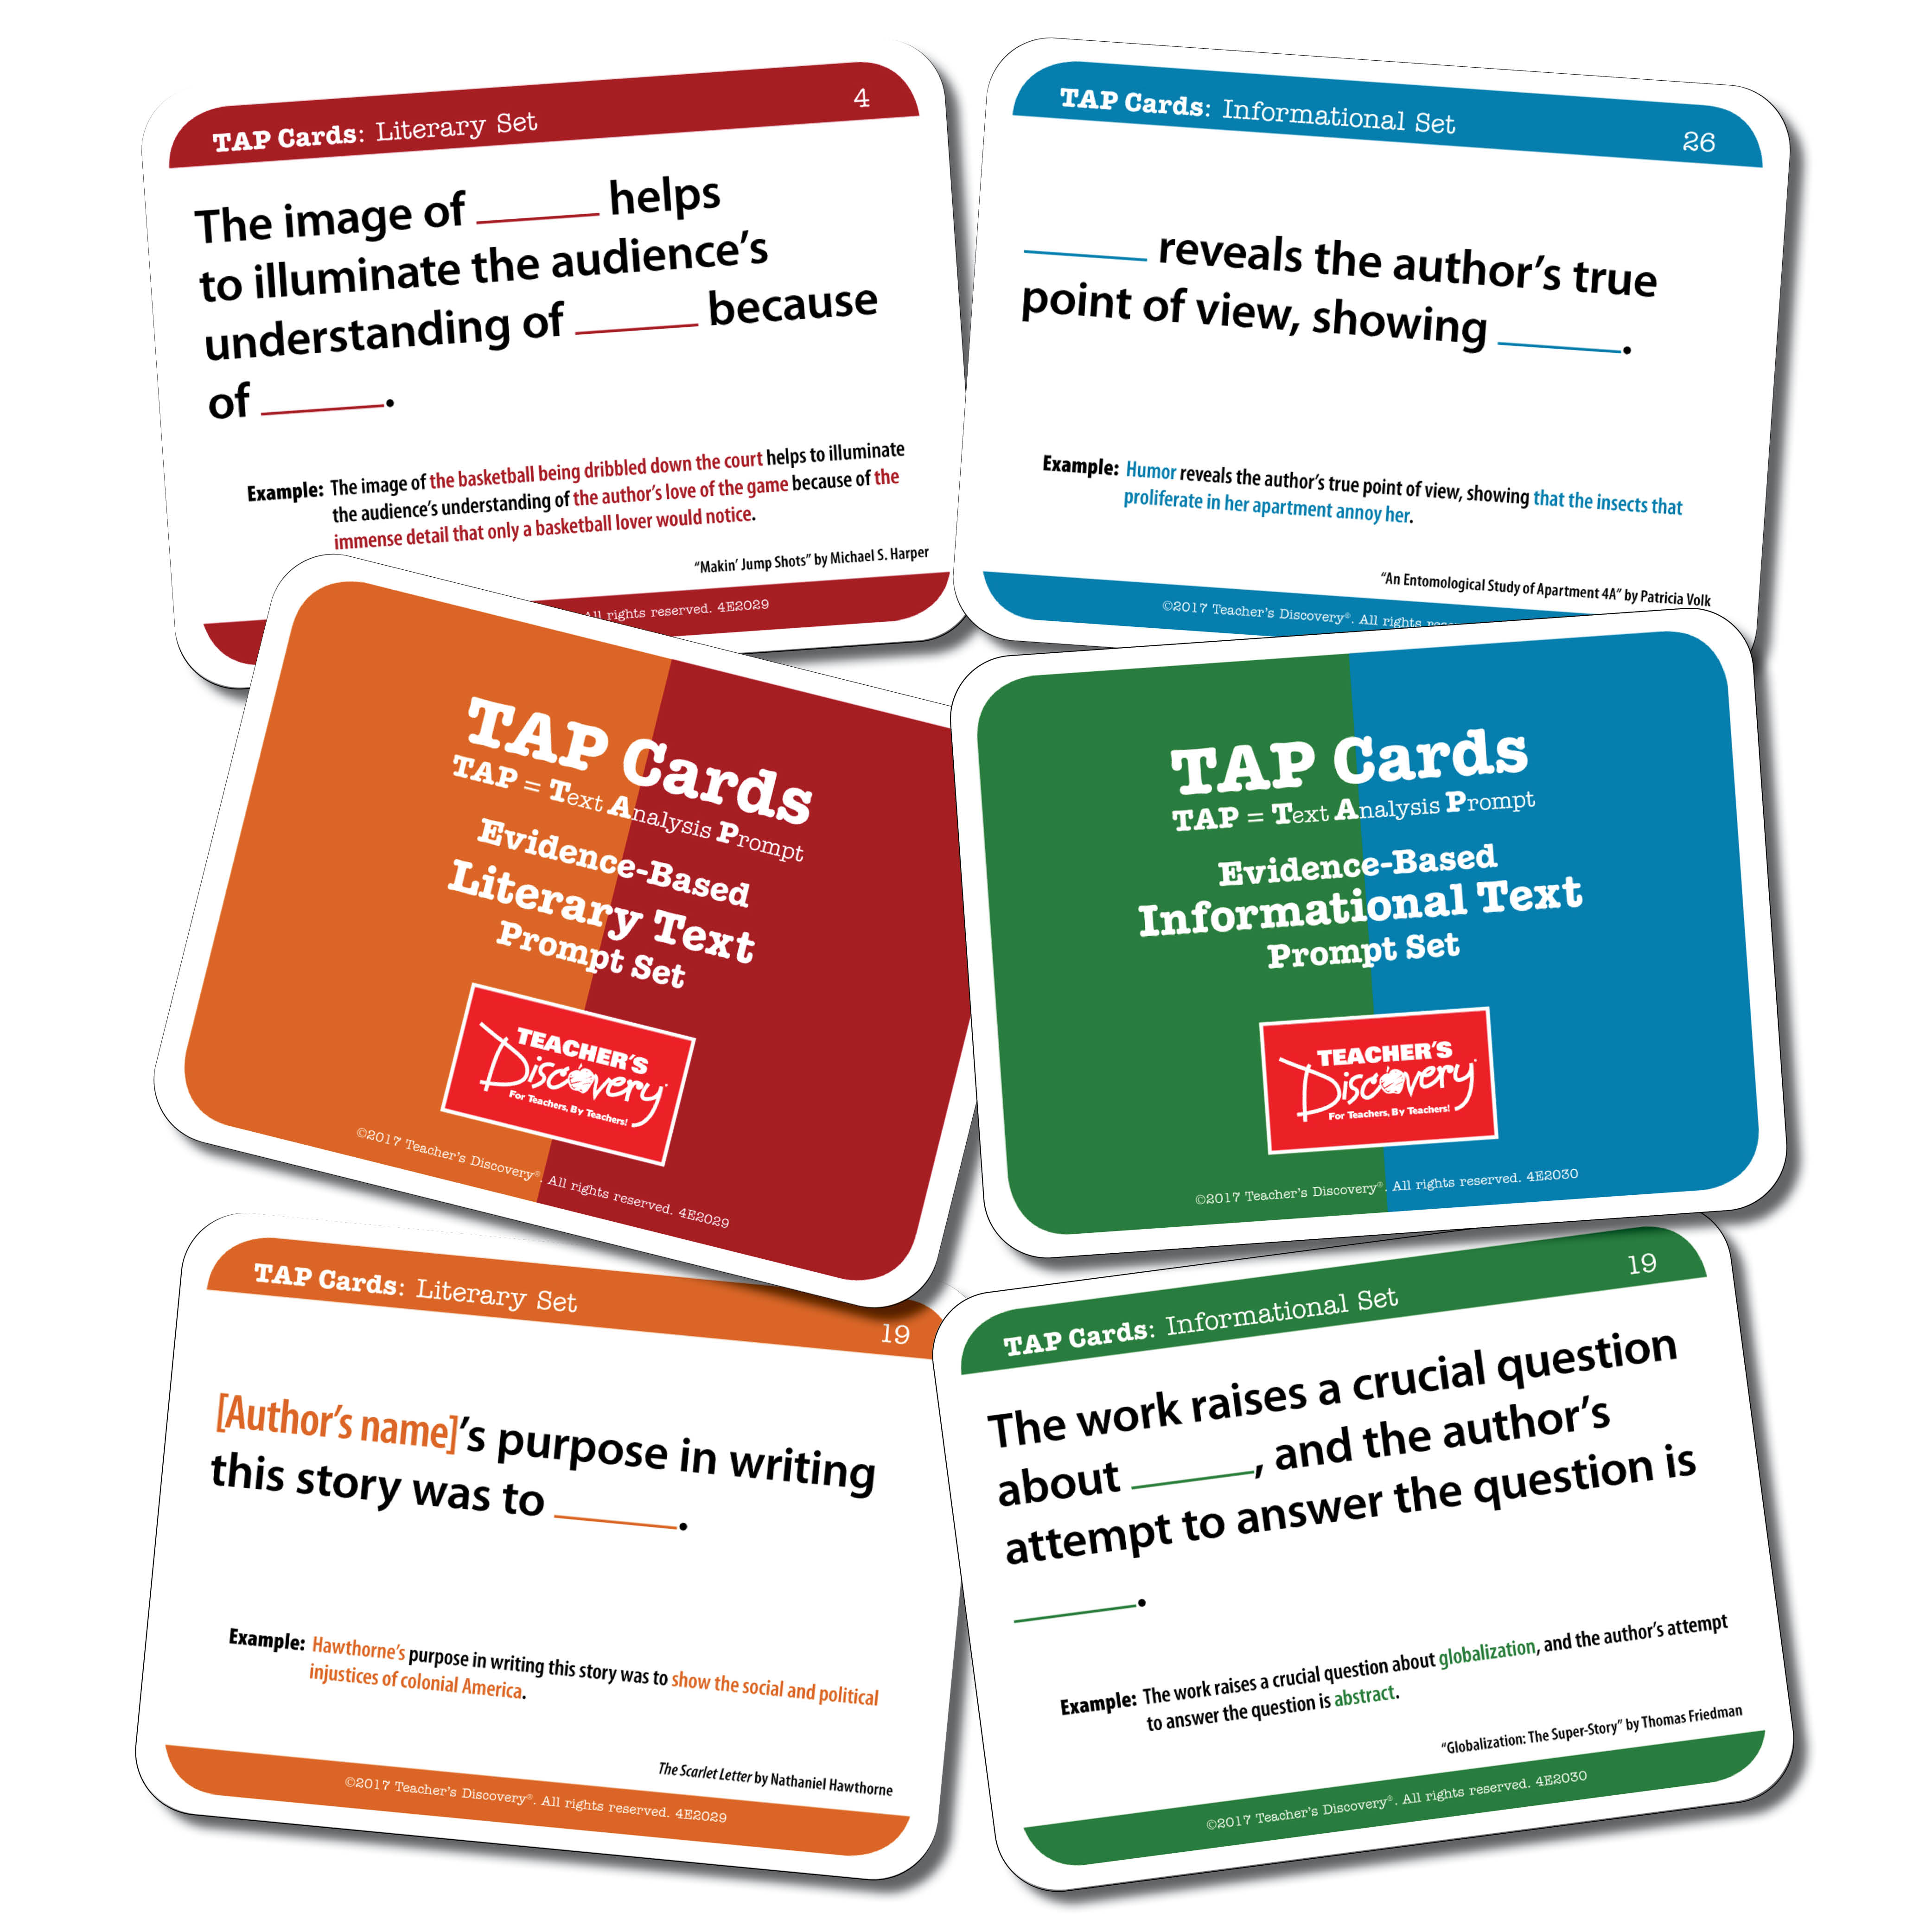 TAP Cards: Informational Text and Literary Text Card Sets for High School